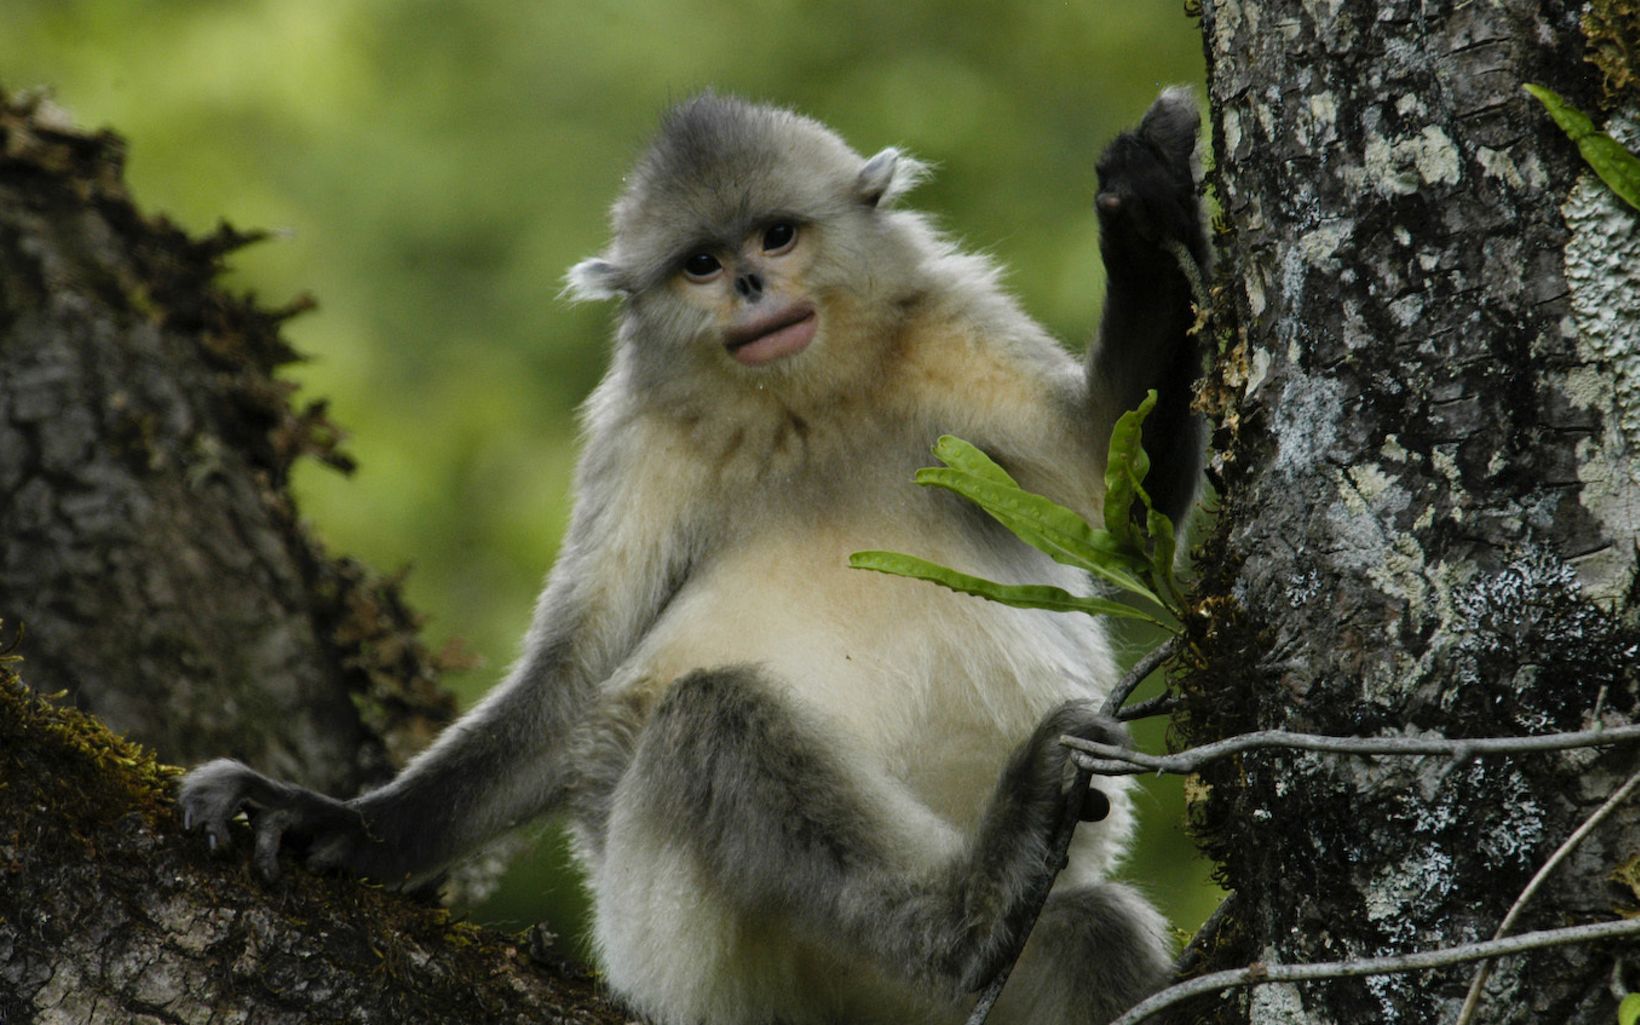 Yunnan golden monkey There are fewer than 2,000 Yunnan golden (snub nosed) monkeys (Rhinopithecus bieti) left in Yunnan's old growth alpine forests. They are considered one of the most endangered primates on Earth. © Long Yongcheng